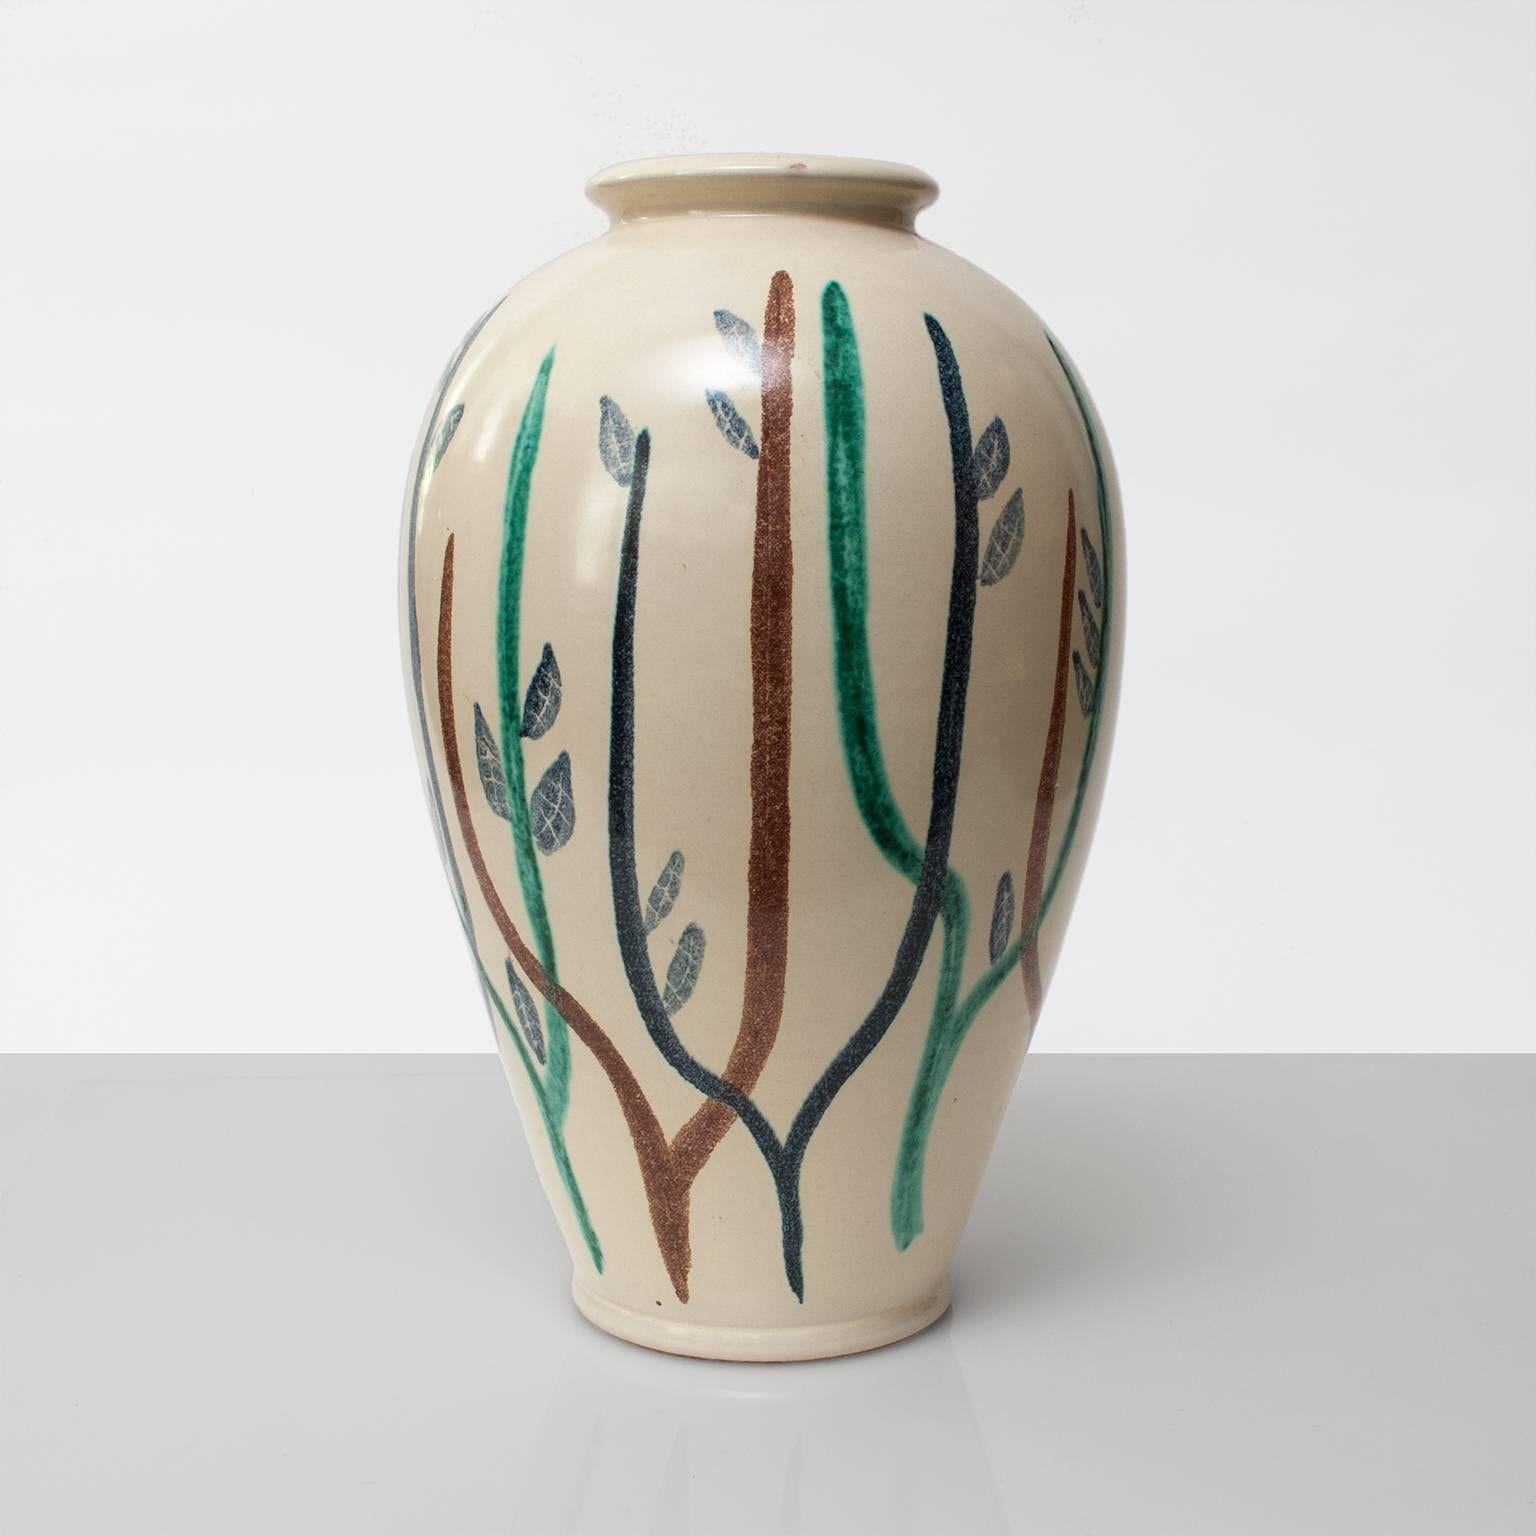 A large Scandinavian Modern ceramic vase in a cream colored glaze and hand decorated by designer Mette Doller. Produced at Höganas Keramik, Sweden circa 1950. 
H: 16